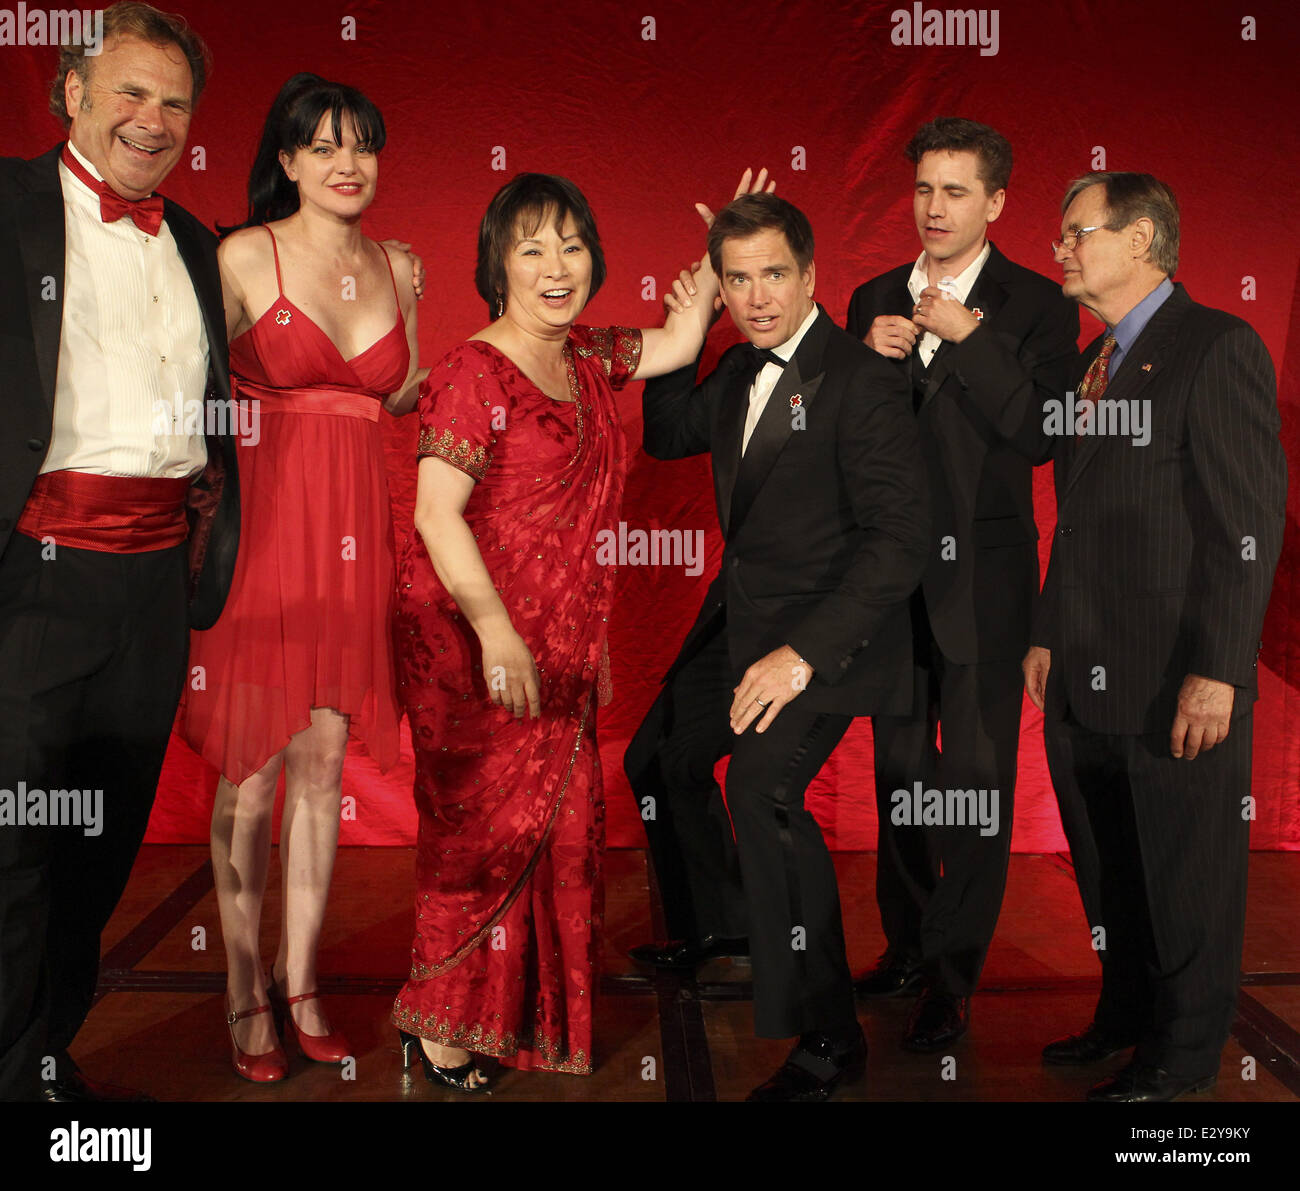 Members of the Armed Forces and the cast of 'NCIS' honoured at the 'Annual Red Cross Red Tie Affair' - Inside  Featuring: Russ T Nailz,Pauley Perrette,Jo Michael Weatherly,Brian Dietzen,David McCallum,Josie Tong Where: Santa Monica, California, United Sta Stock Photo